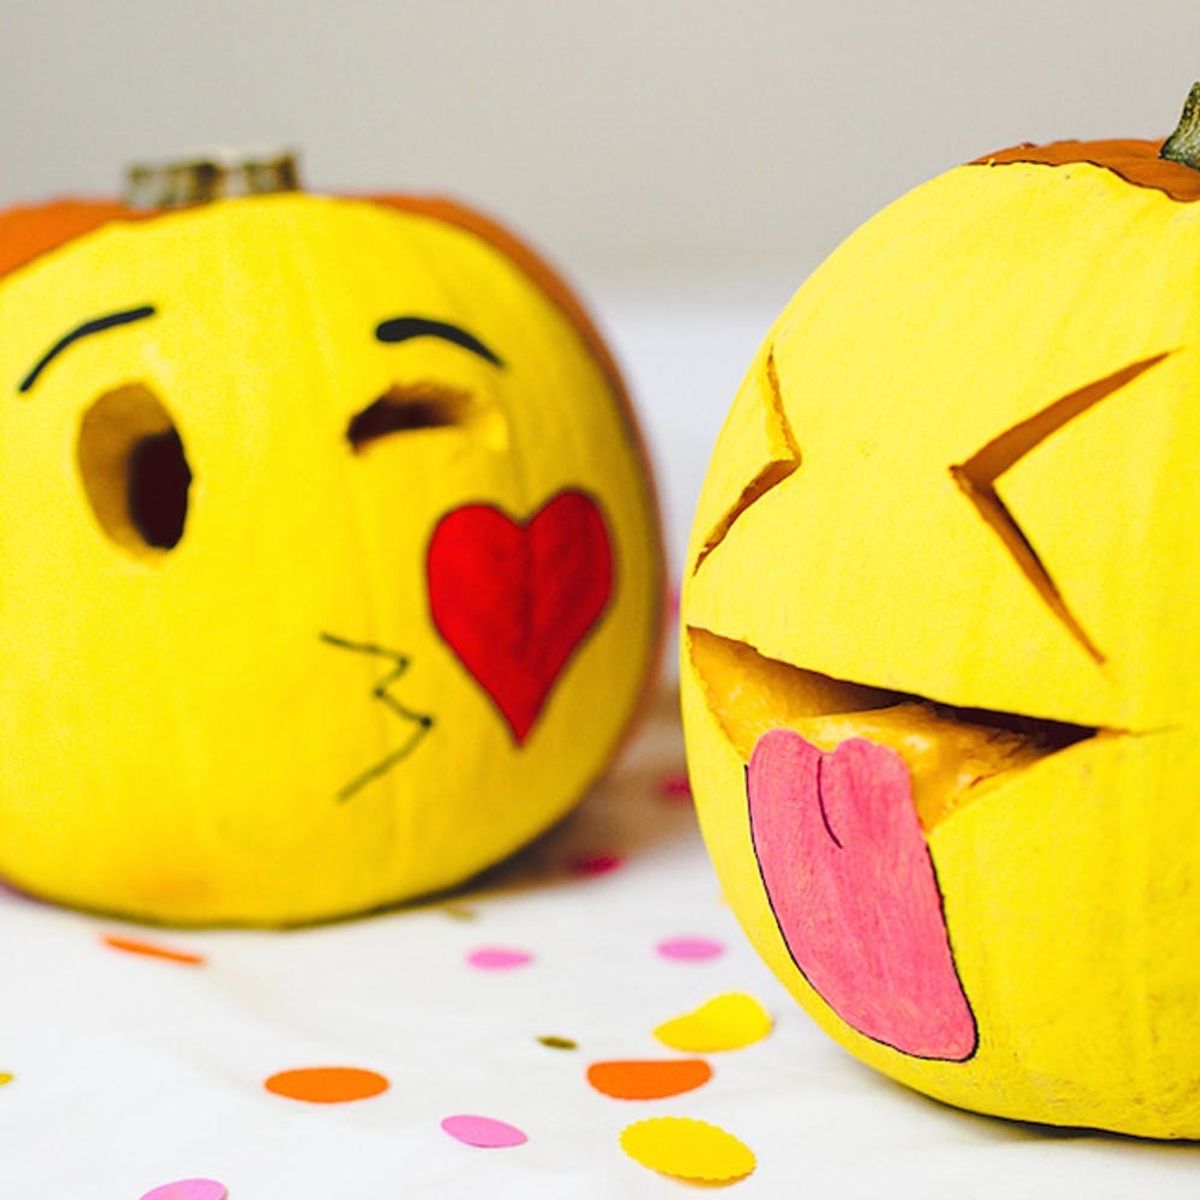 29 Creative Pumpkin Faces to Carve for Halloween